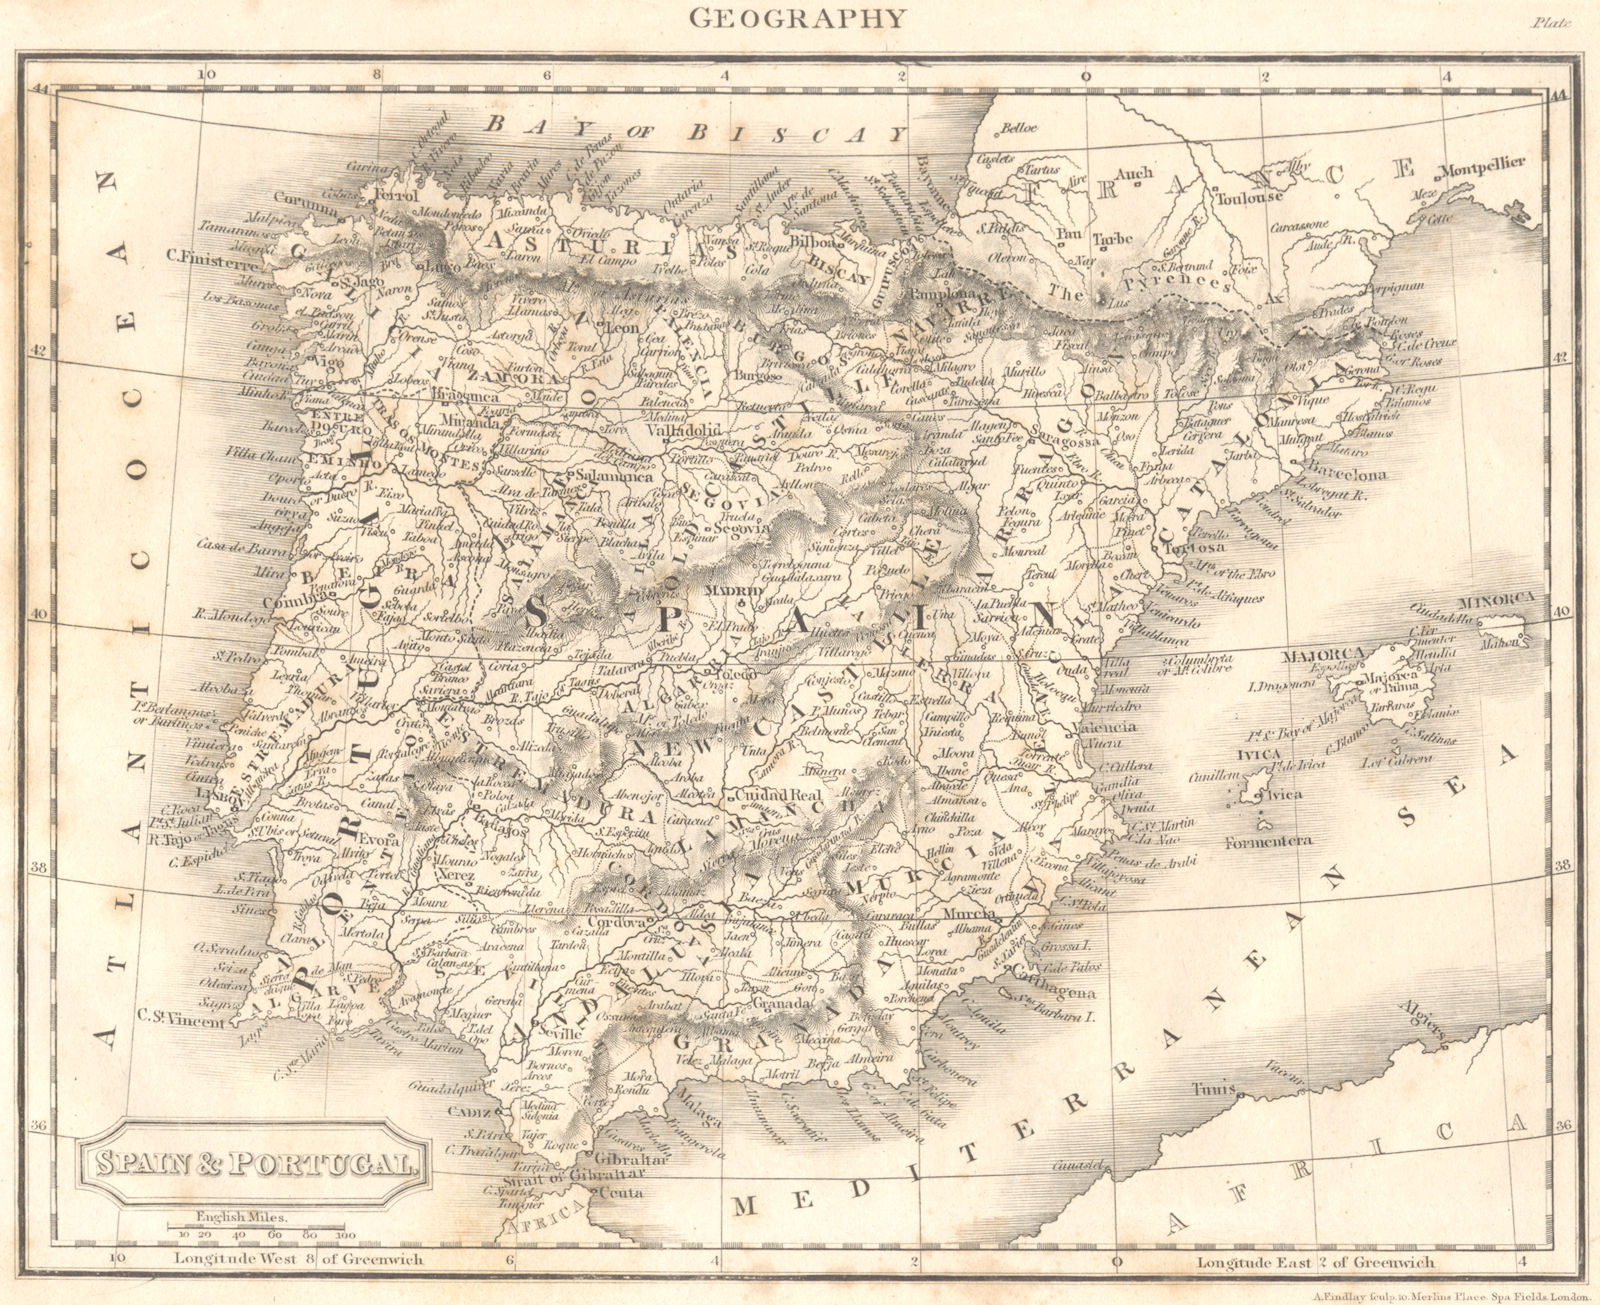 IBERIA. Spain & Portugal. (Oxford Encyclopaedia) 1830 old antique map chart